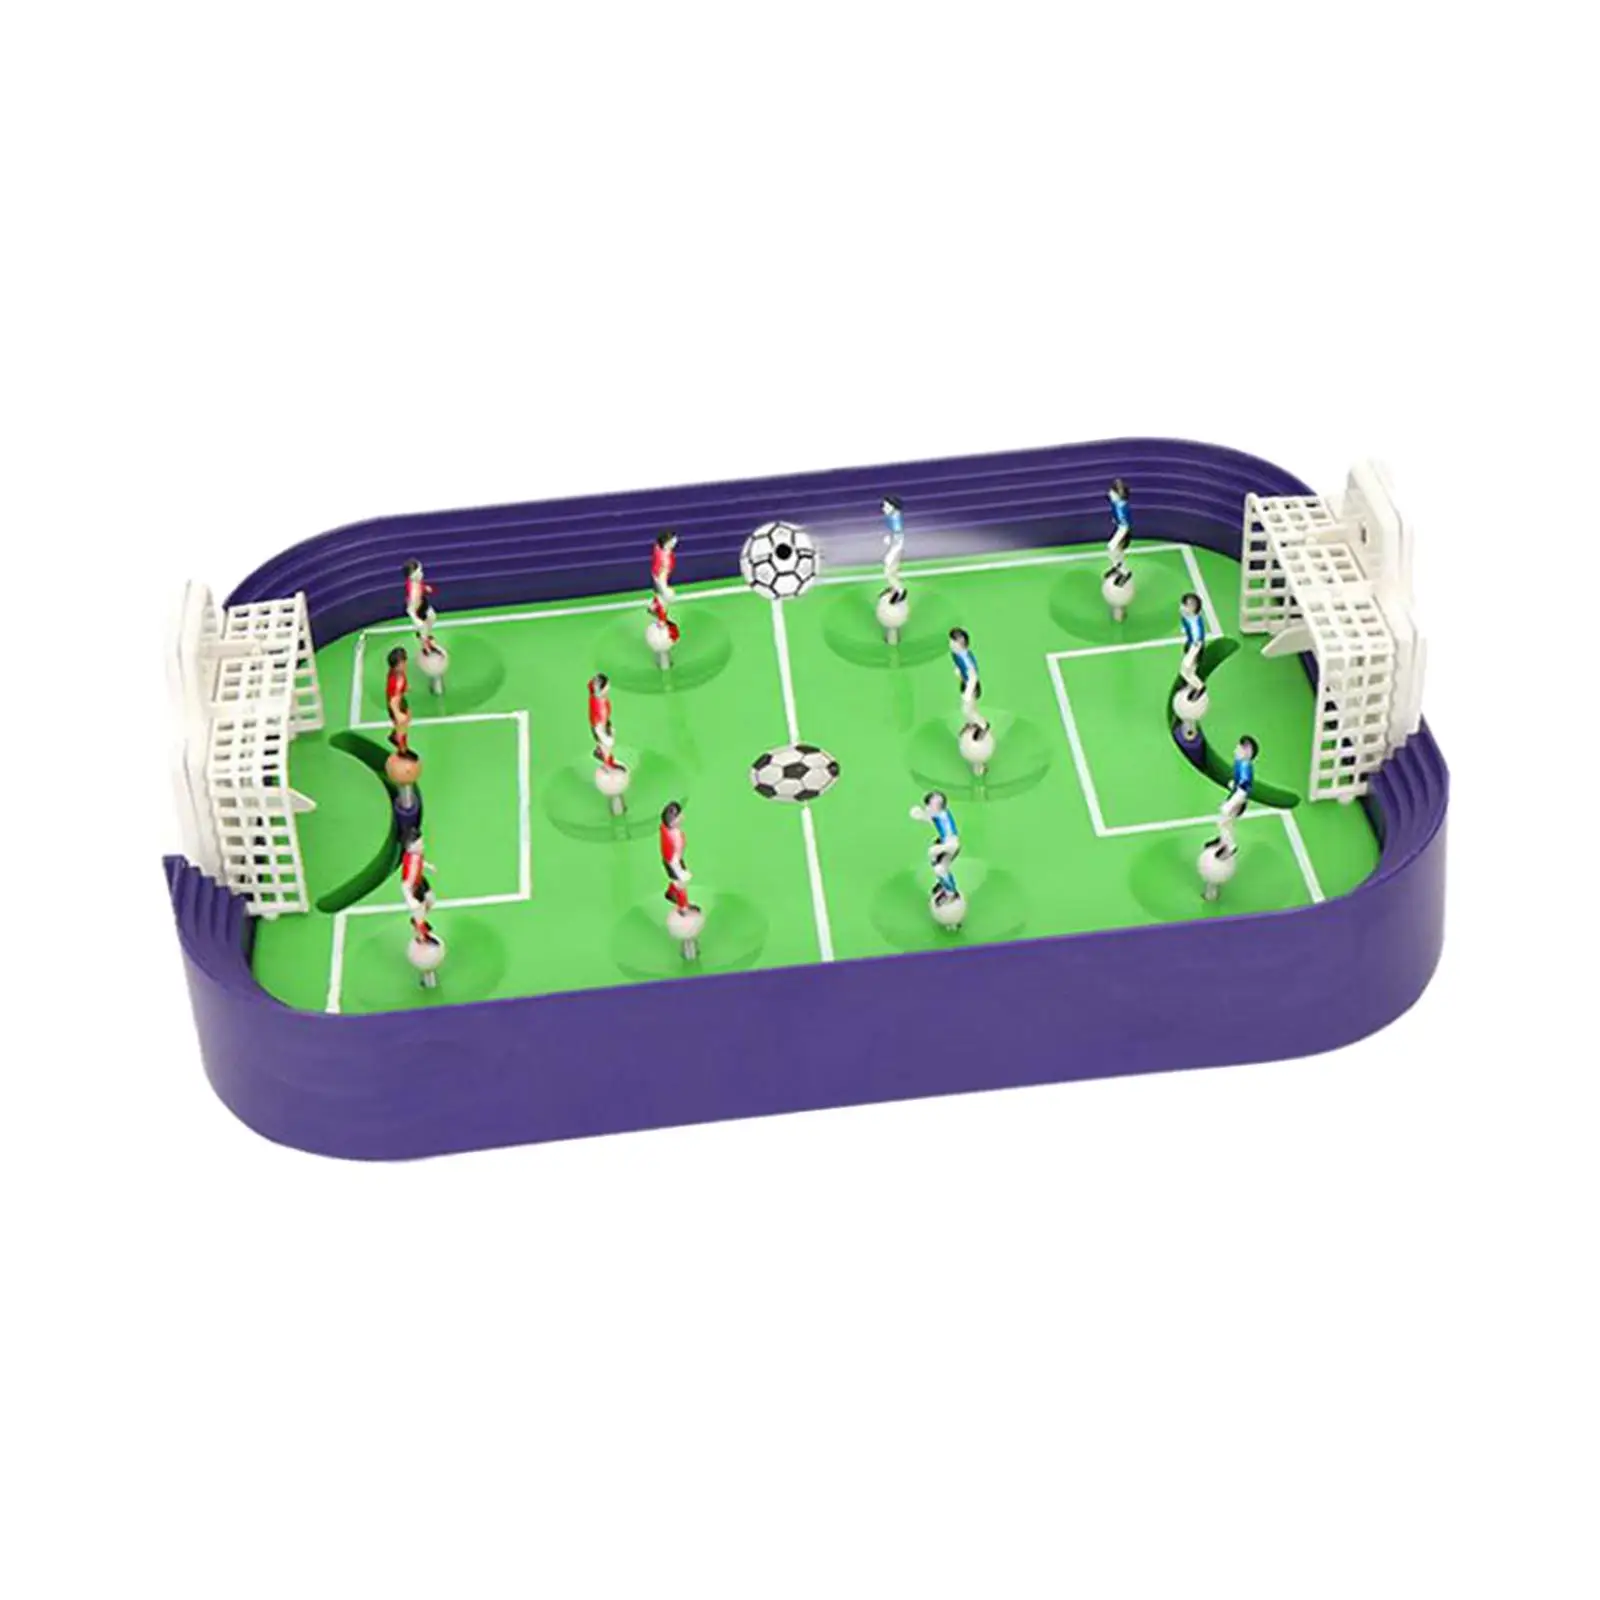 Portable Table Football Game Soccer Table Game Table Board Interactive Toy Mini Tabletop Football for Teens Boys Adults Family